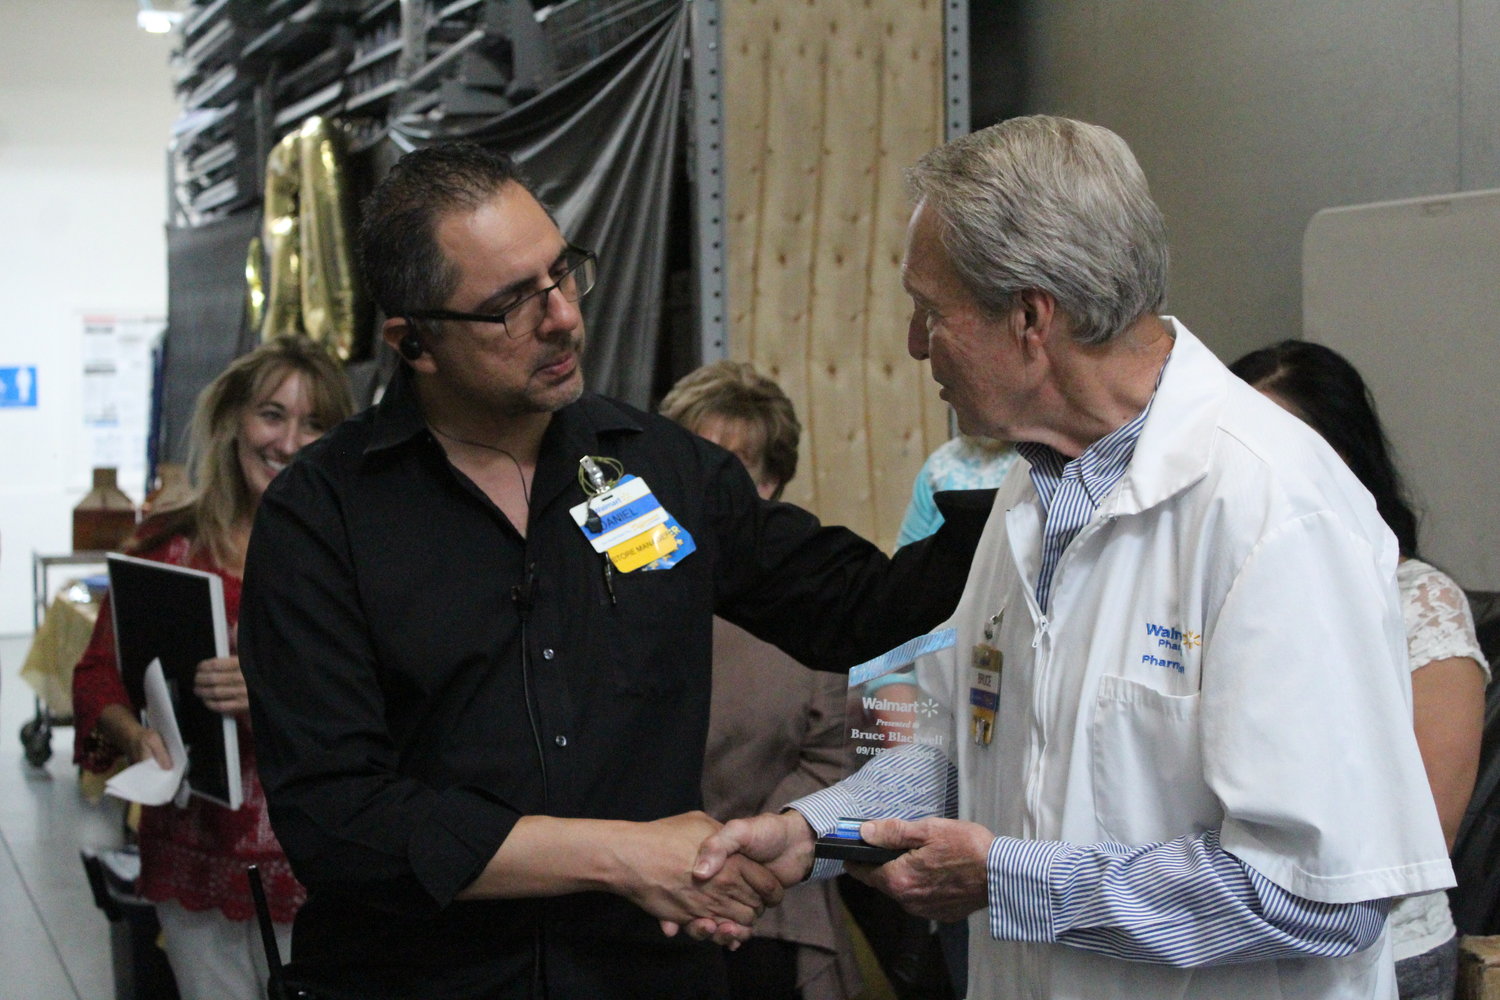 Gonzales Walmart store manager Daniel Trevino (left) shakes hands with Walmart’s Pharmacist Manager Bruce Blackwell (right) as he congratulates him for 50 years of working with the company.